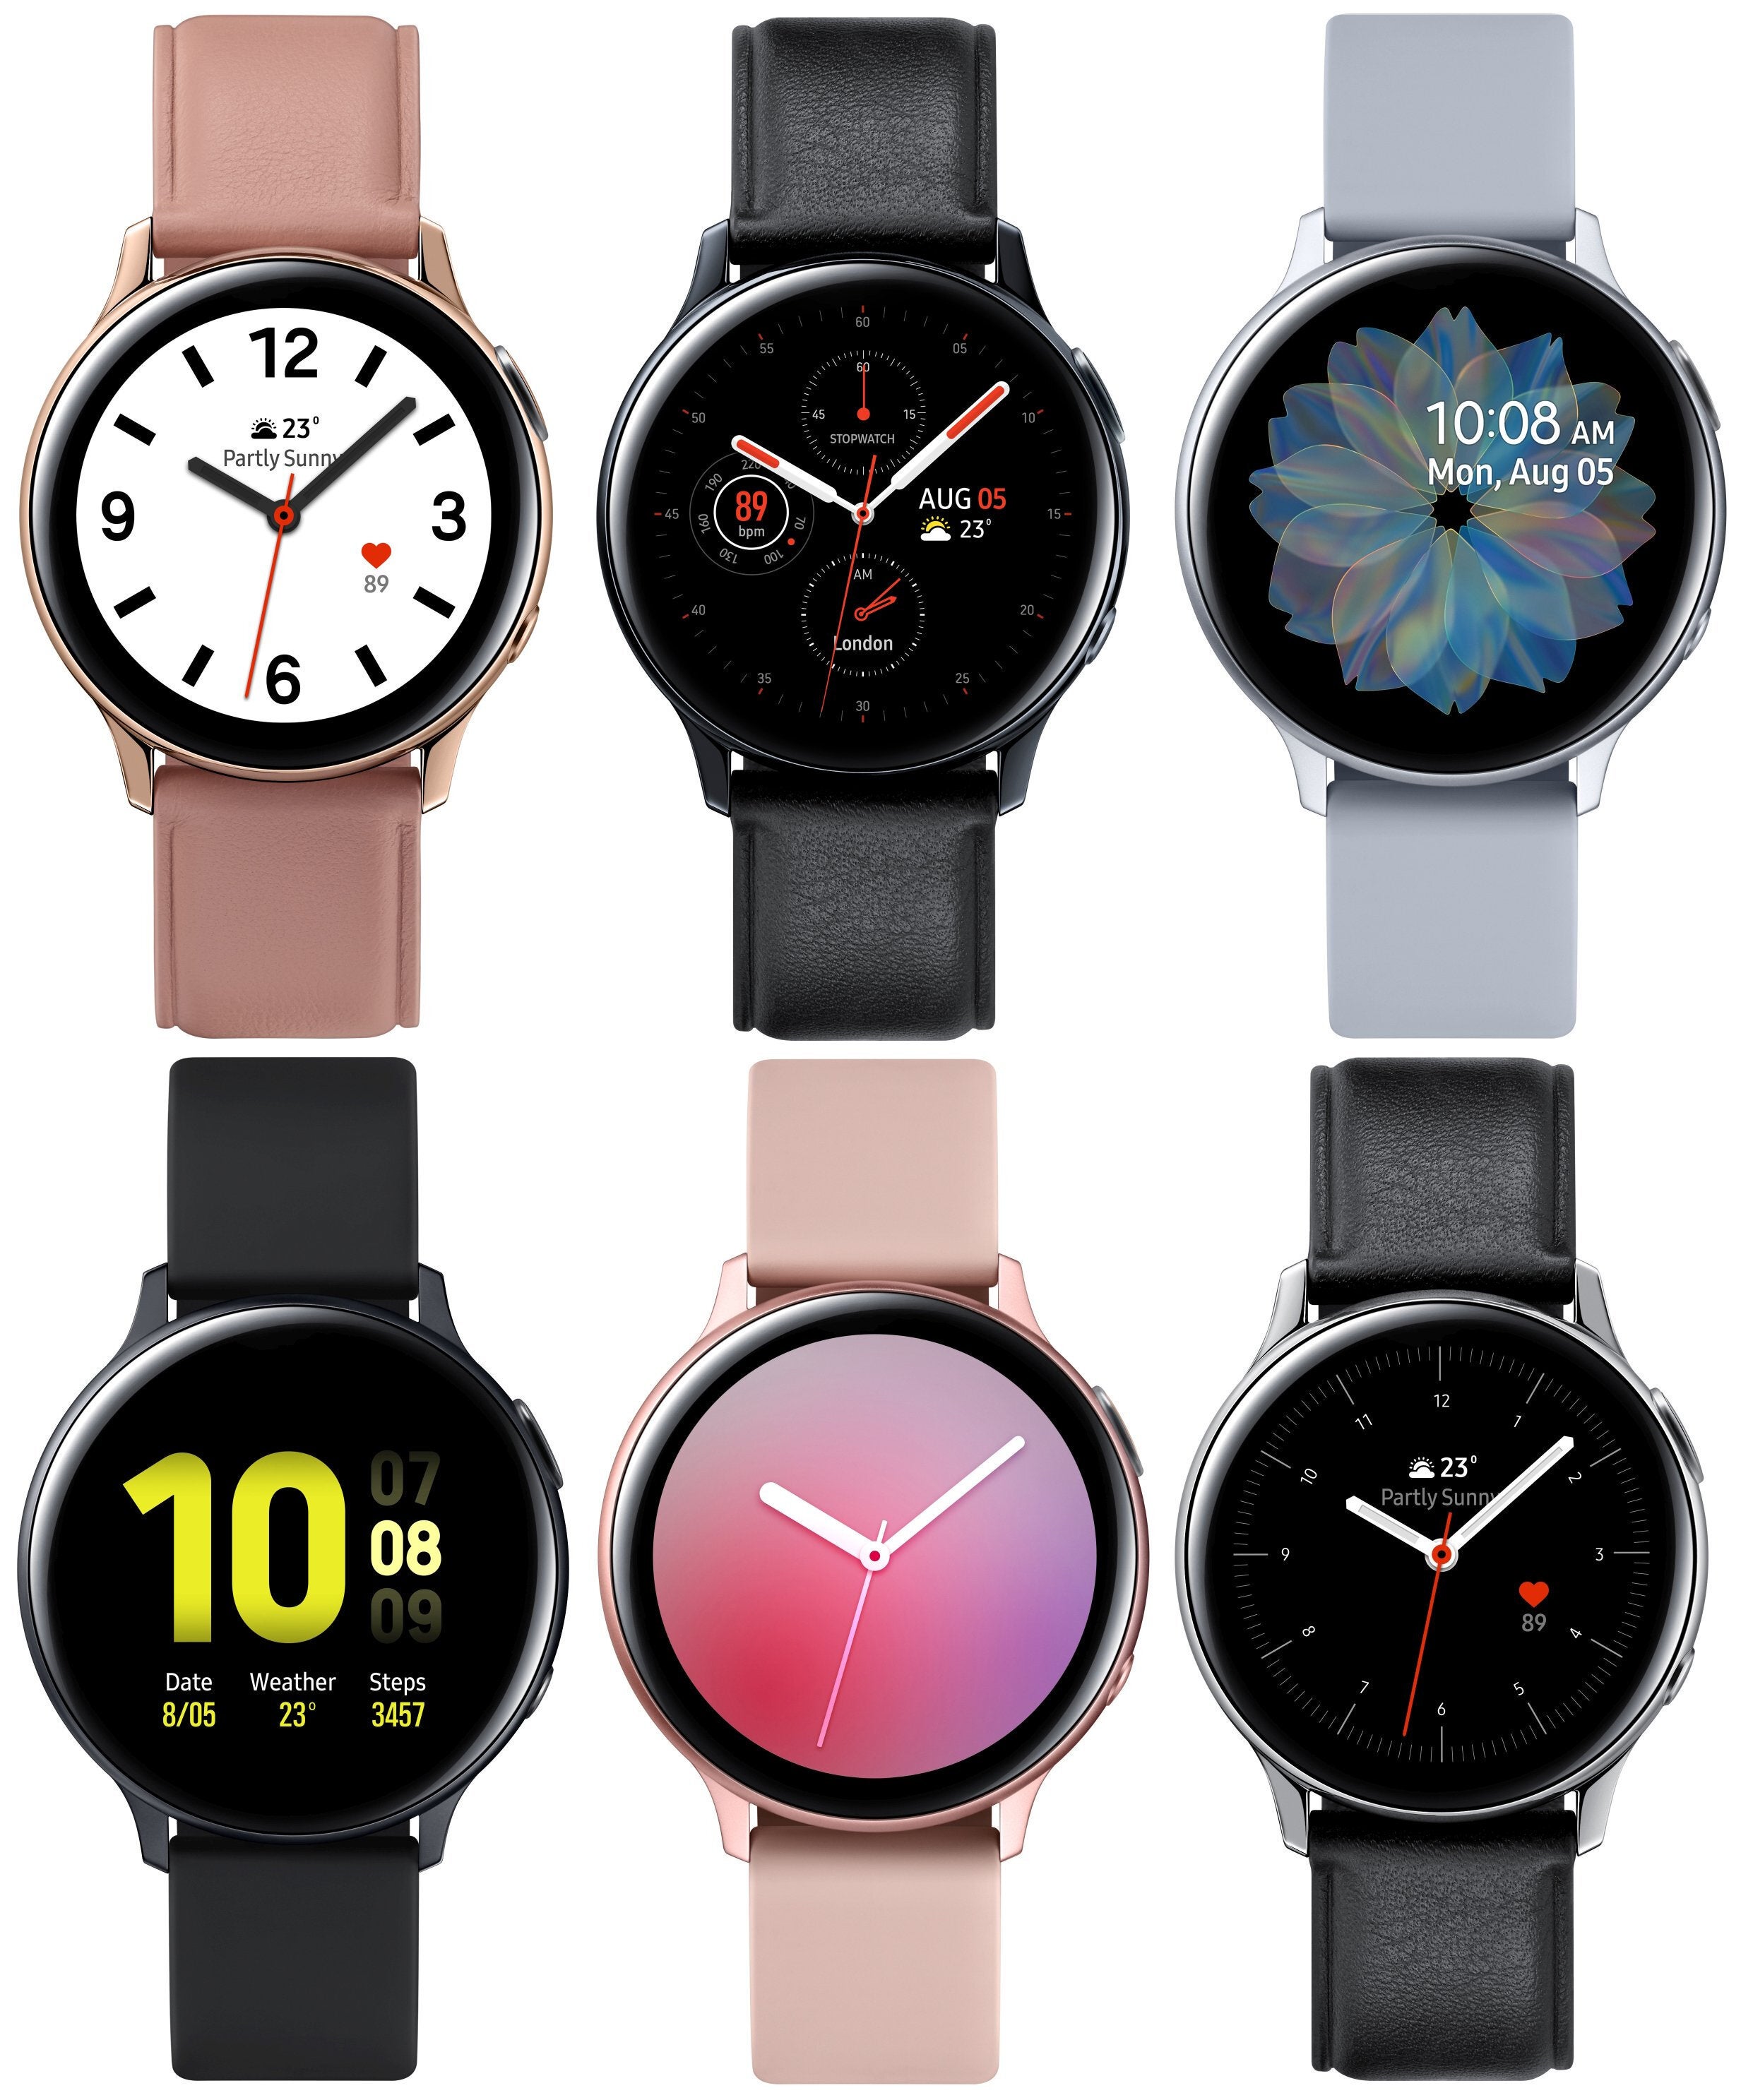 Even more pictures show the Samsung Galaxy Watch Active 2 in all its glory